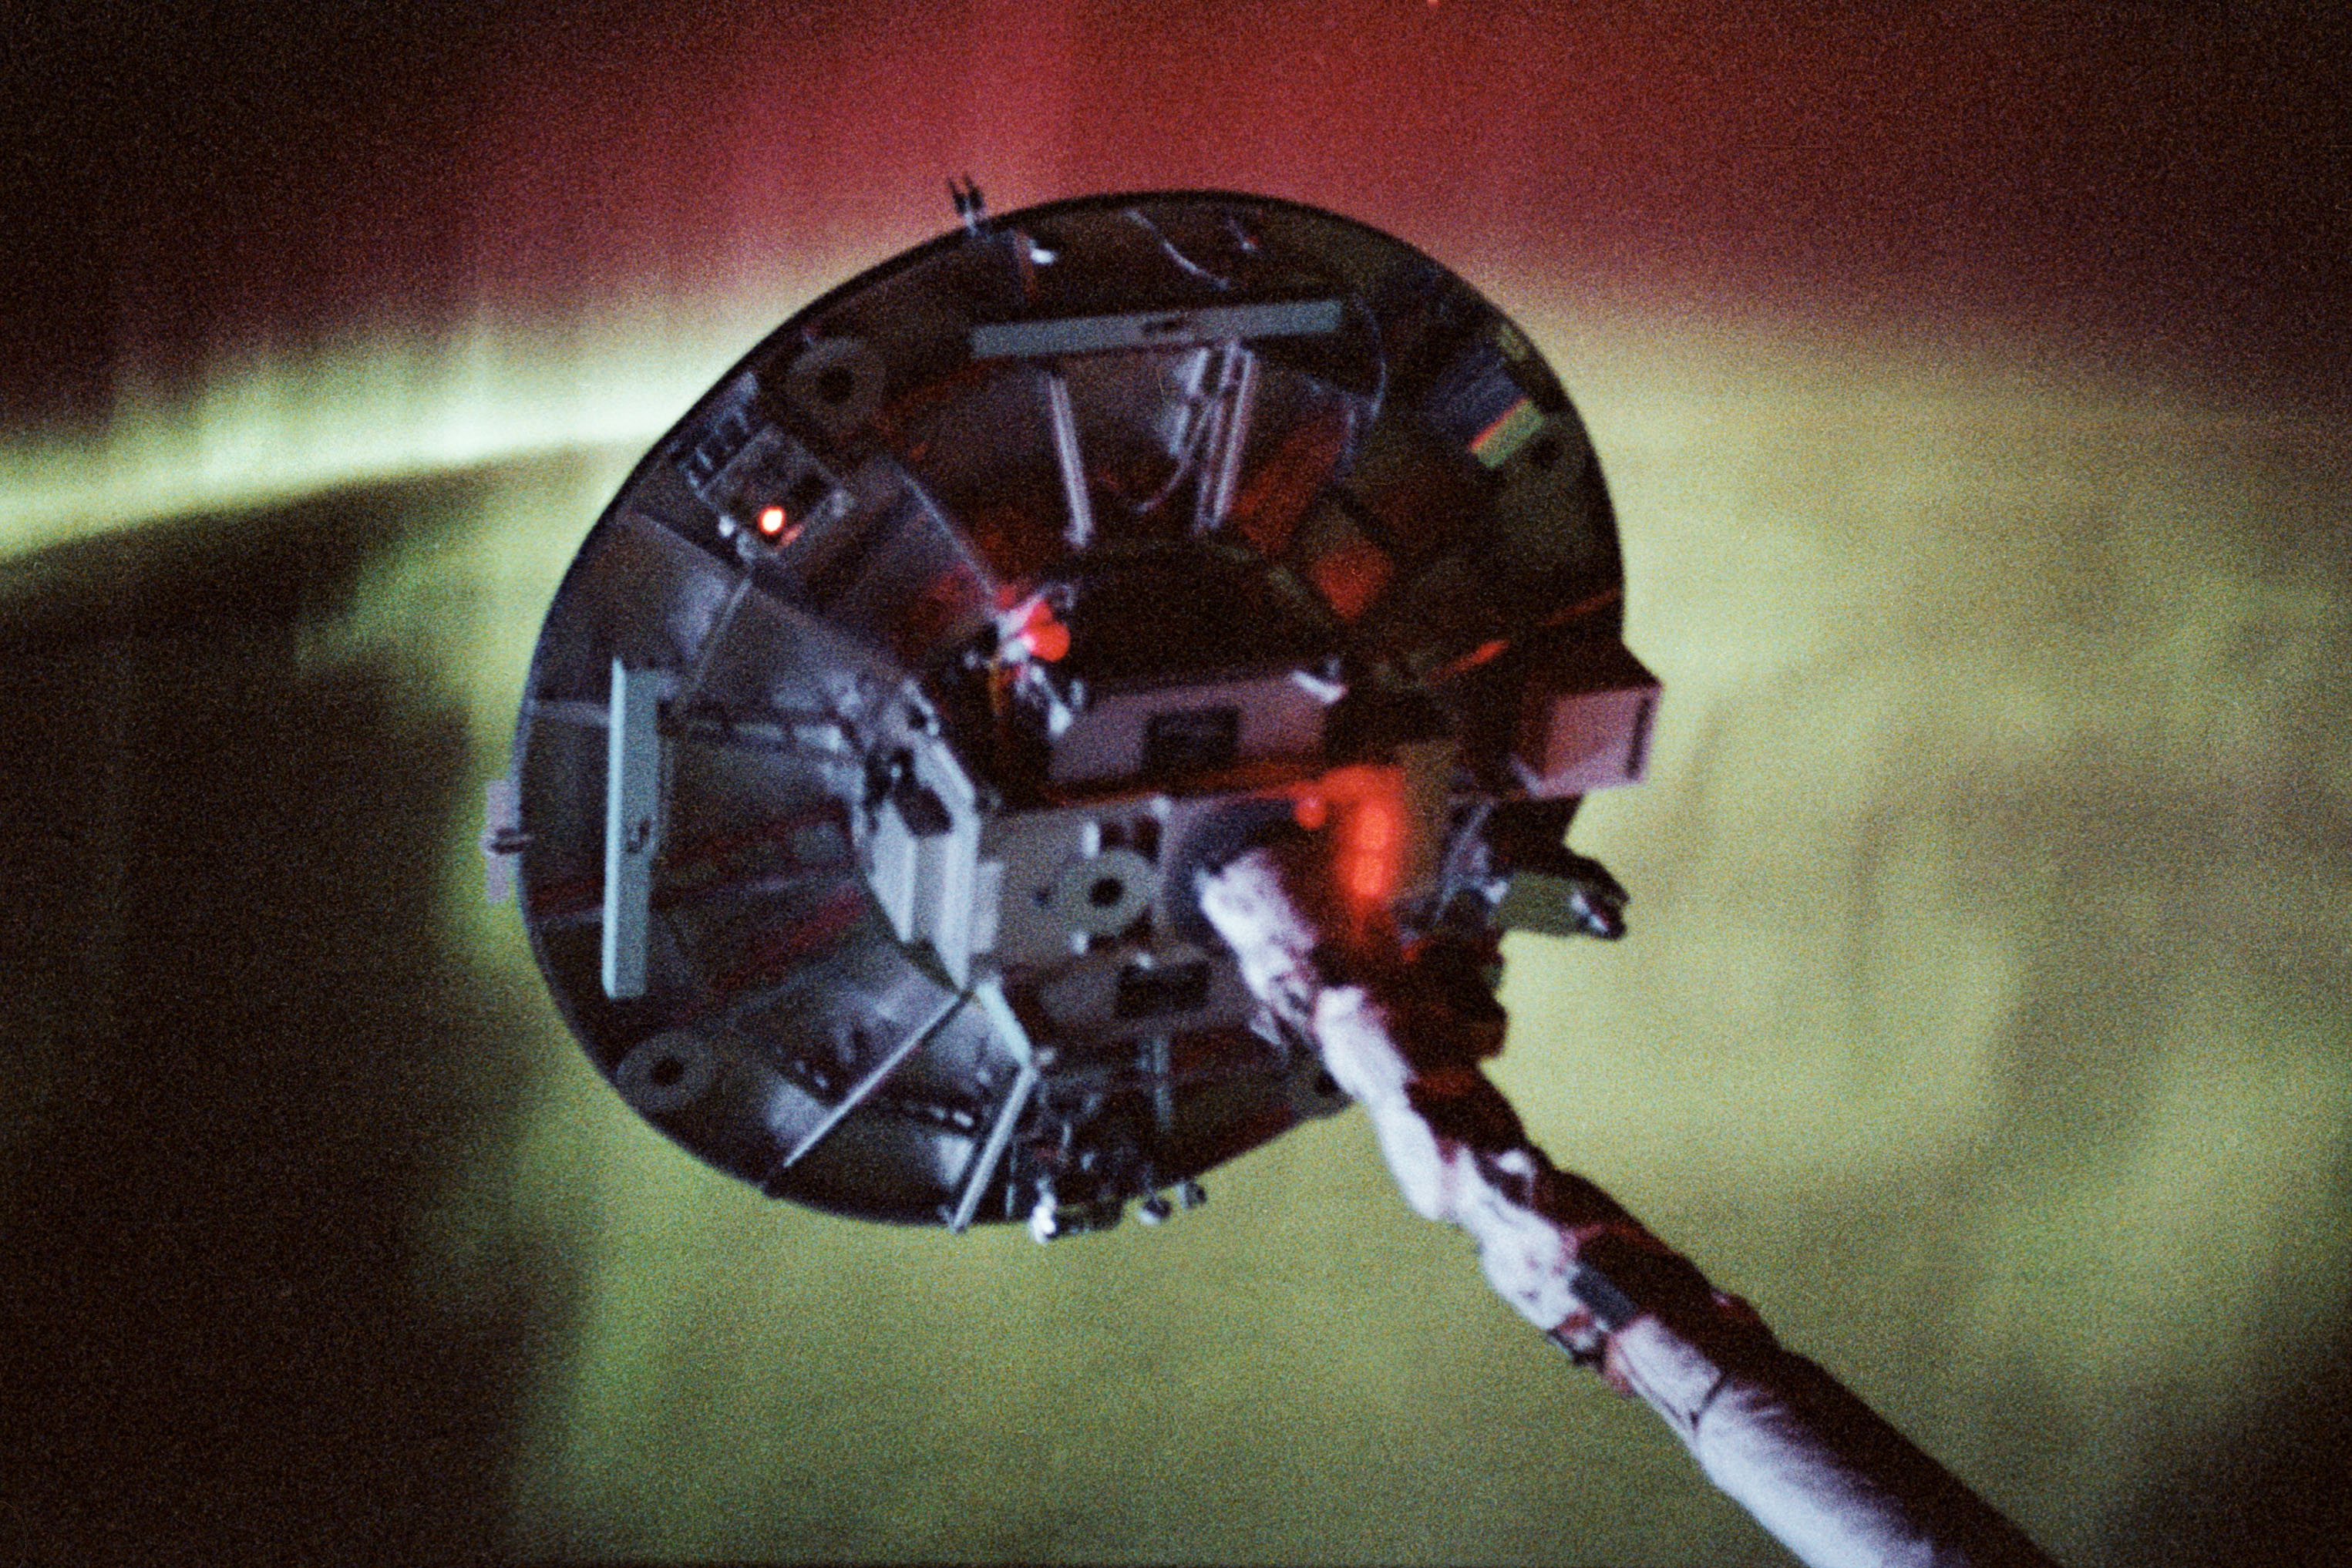 The Wake Shield Facility (WSF) deployed at the end of the Canadian-built Remote Manipulator System, with the aurora in the background